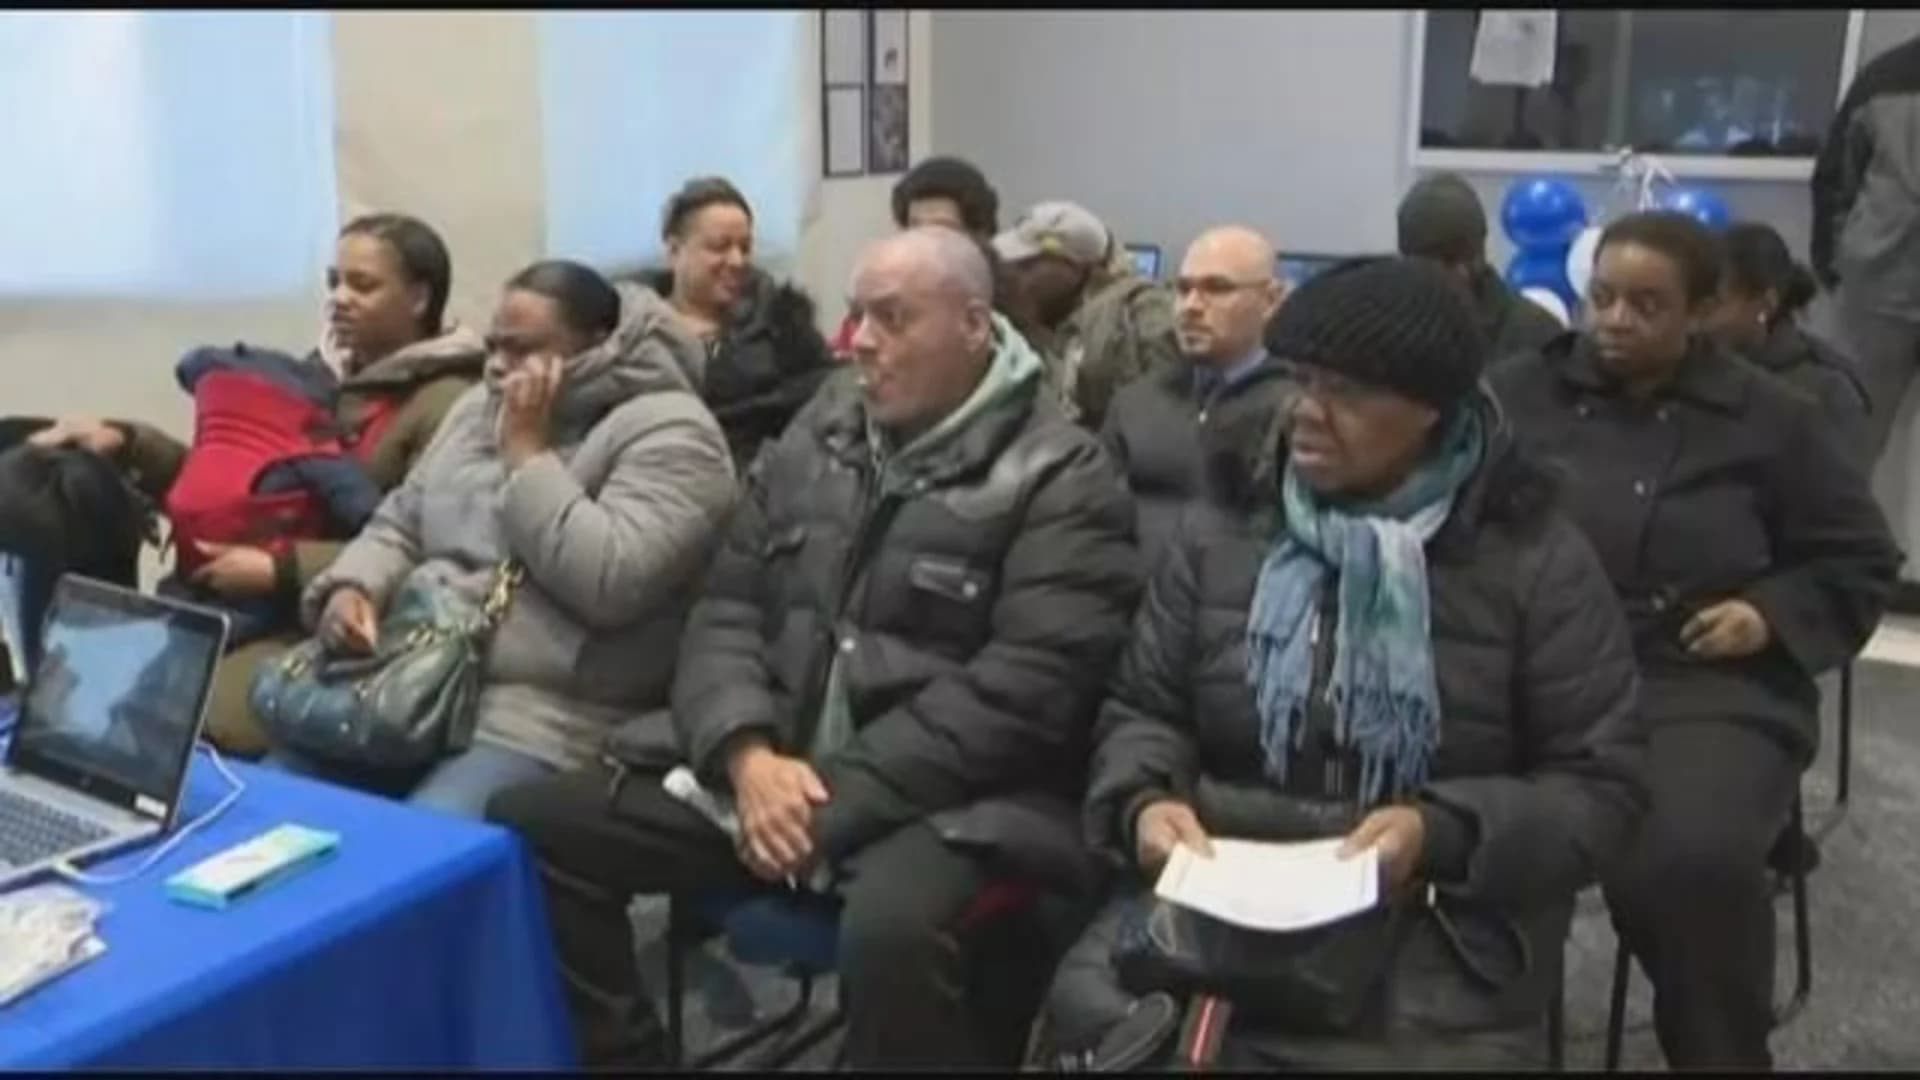 US Postal Service hosts job fair, looking for carrier assistants in the Bronx